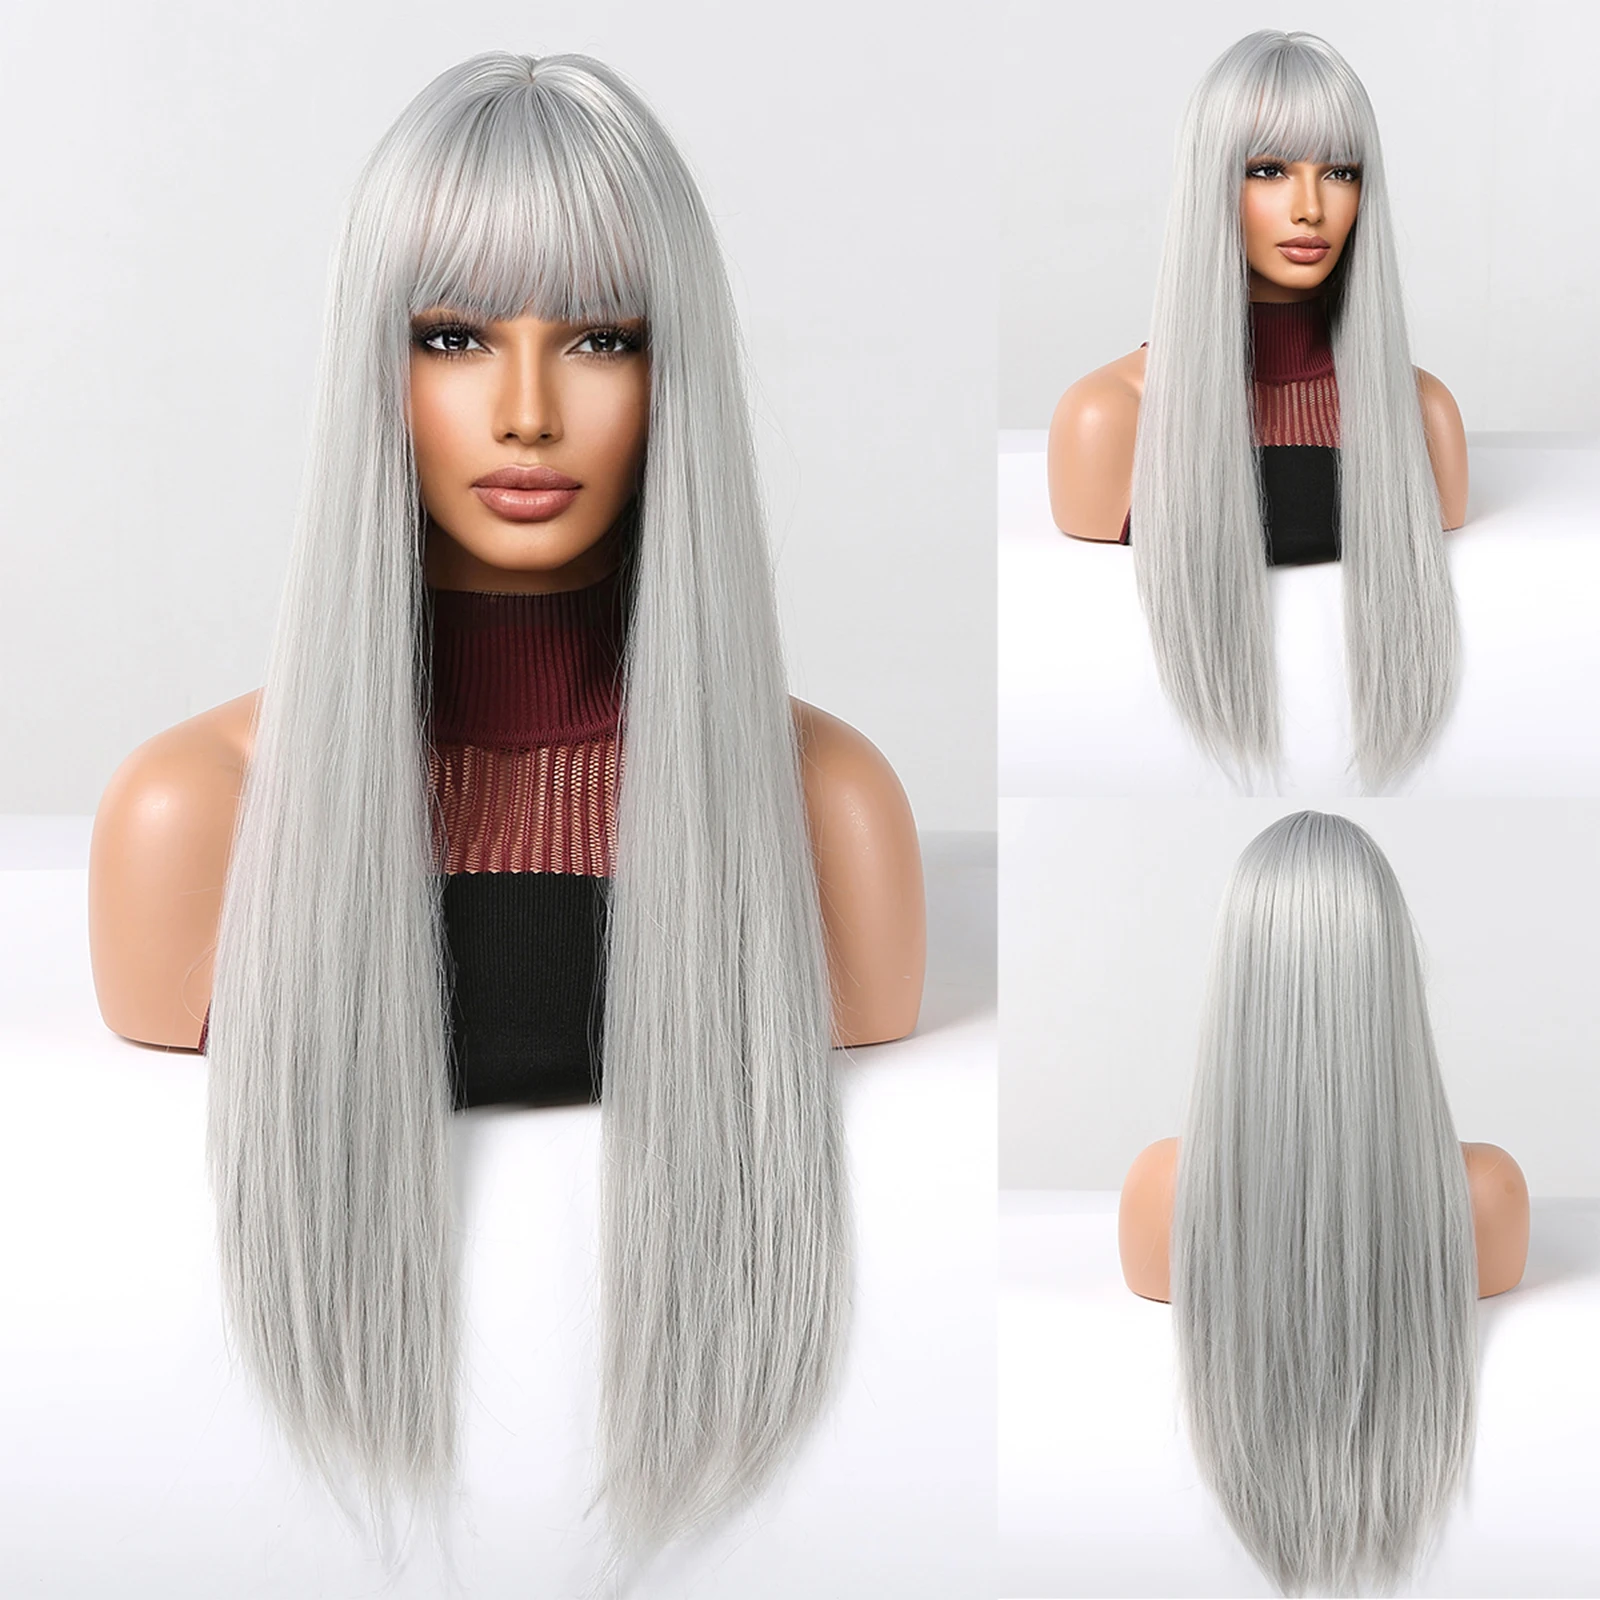 EASIHAIR Long Wigs with Bangs Silver Grey Blonde Cosplay Synthetic Straight Hair Wig for Women African Party Use Heat Resistant